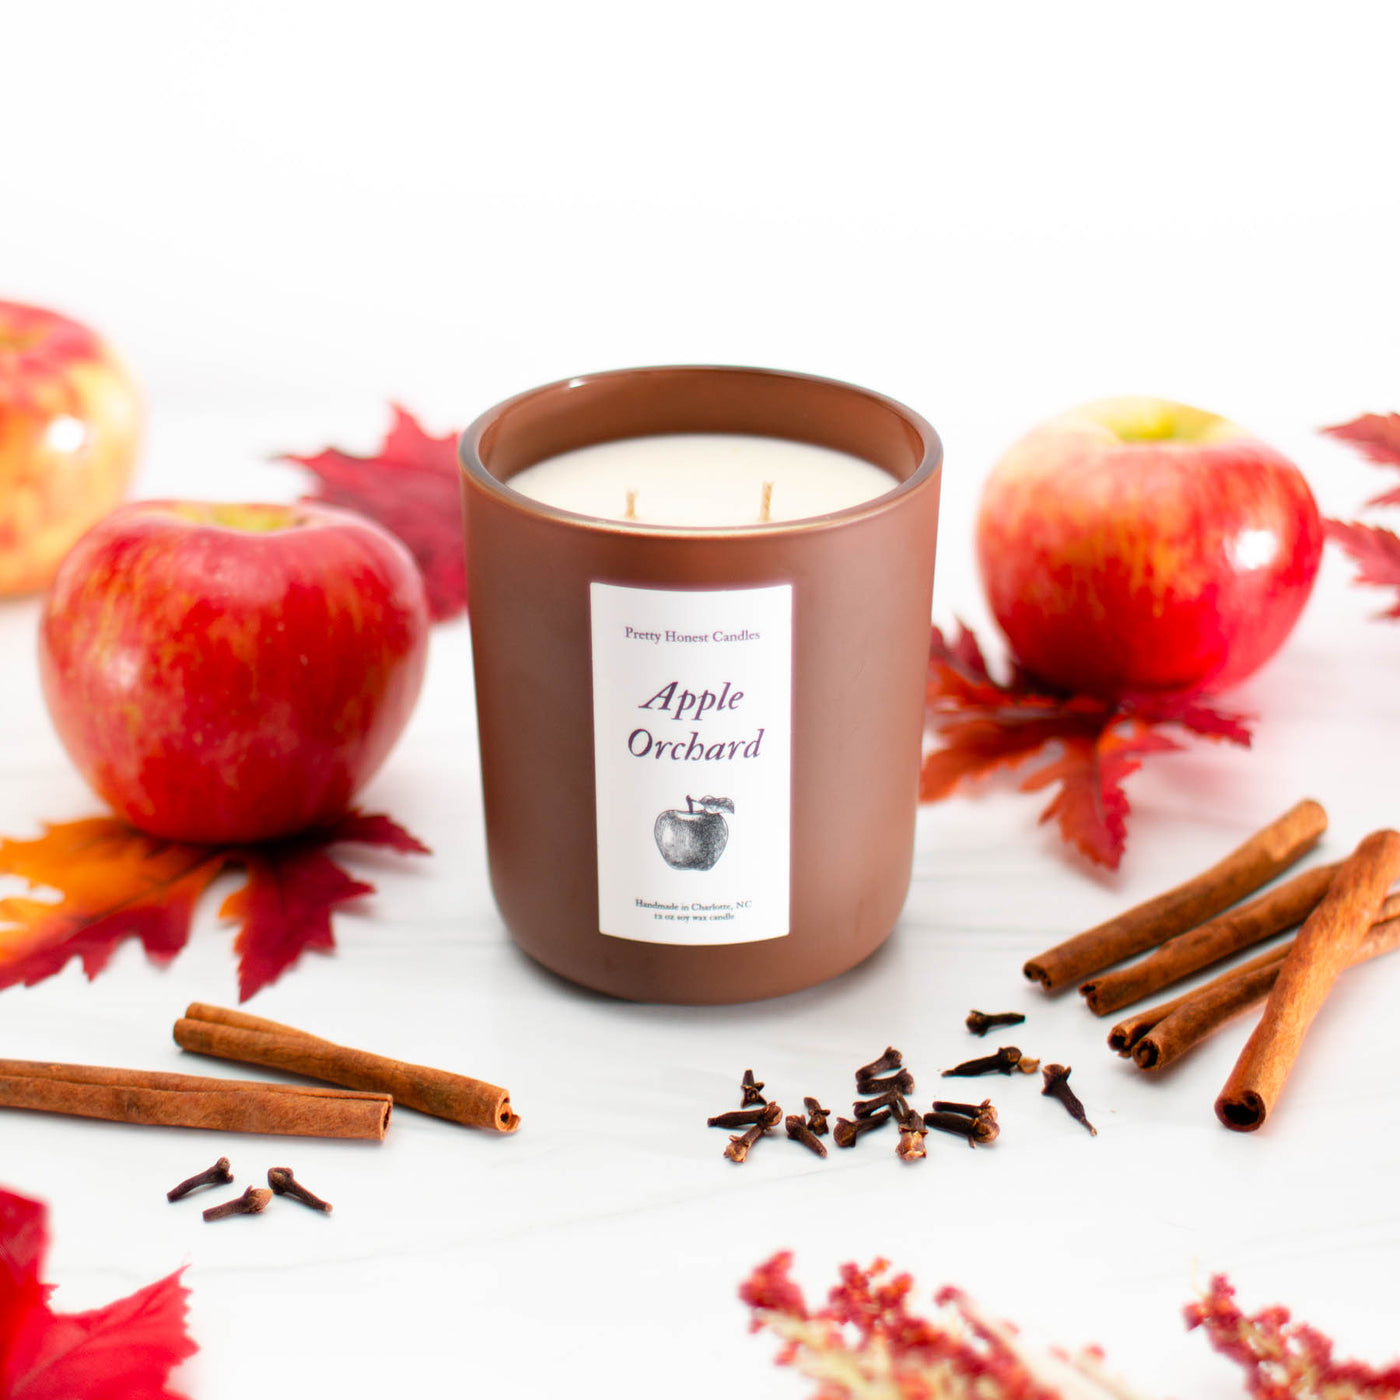 Apple Orchard Double Wick Soy Candle